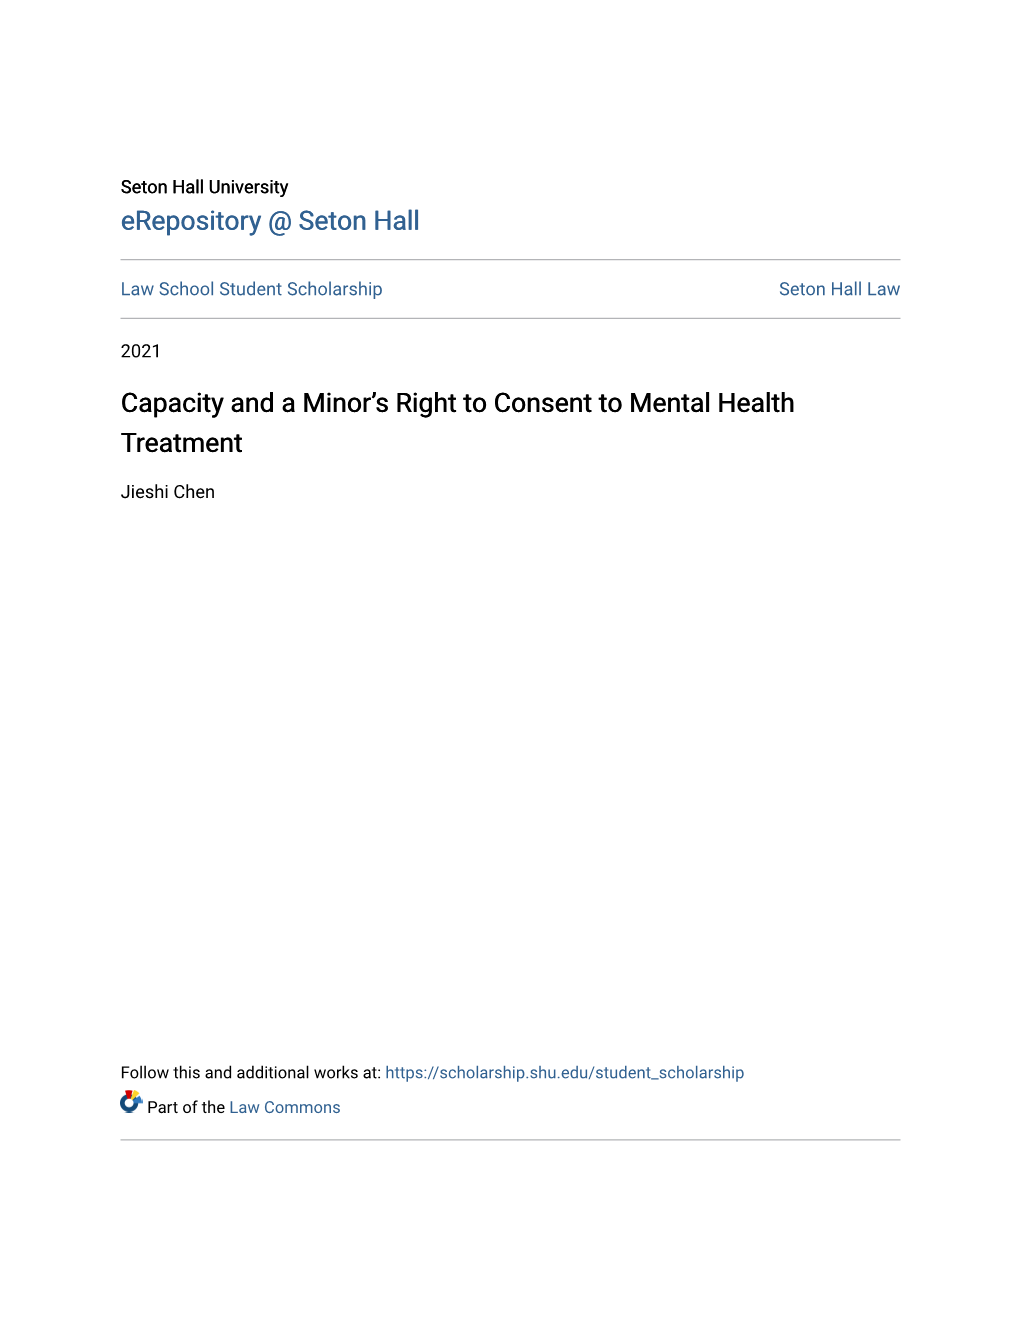 Capacity and a Minor's Right to Consent to Mental Health Treatment